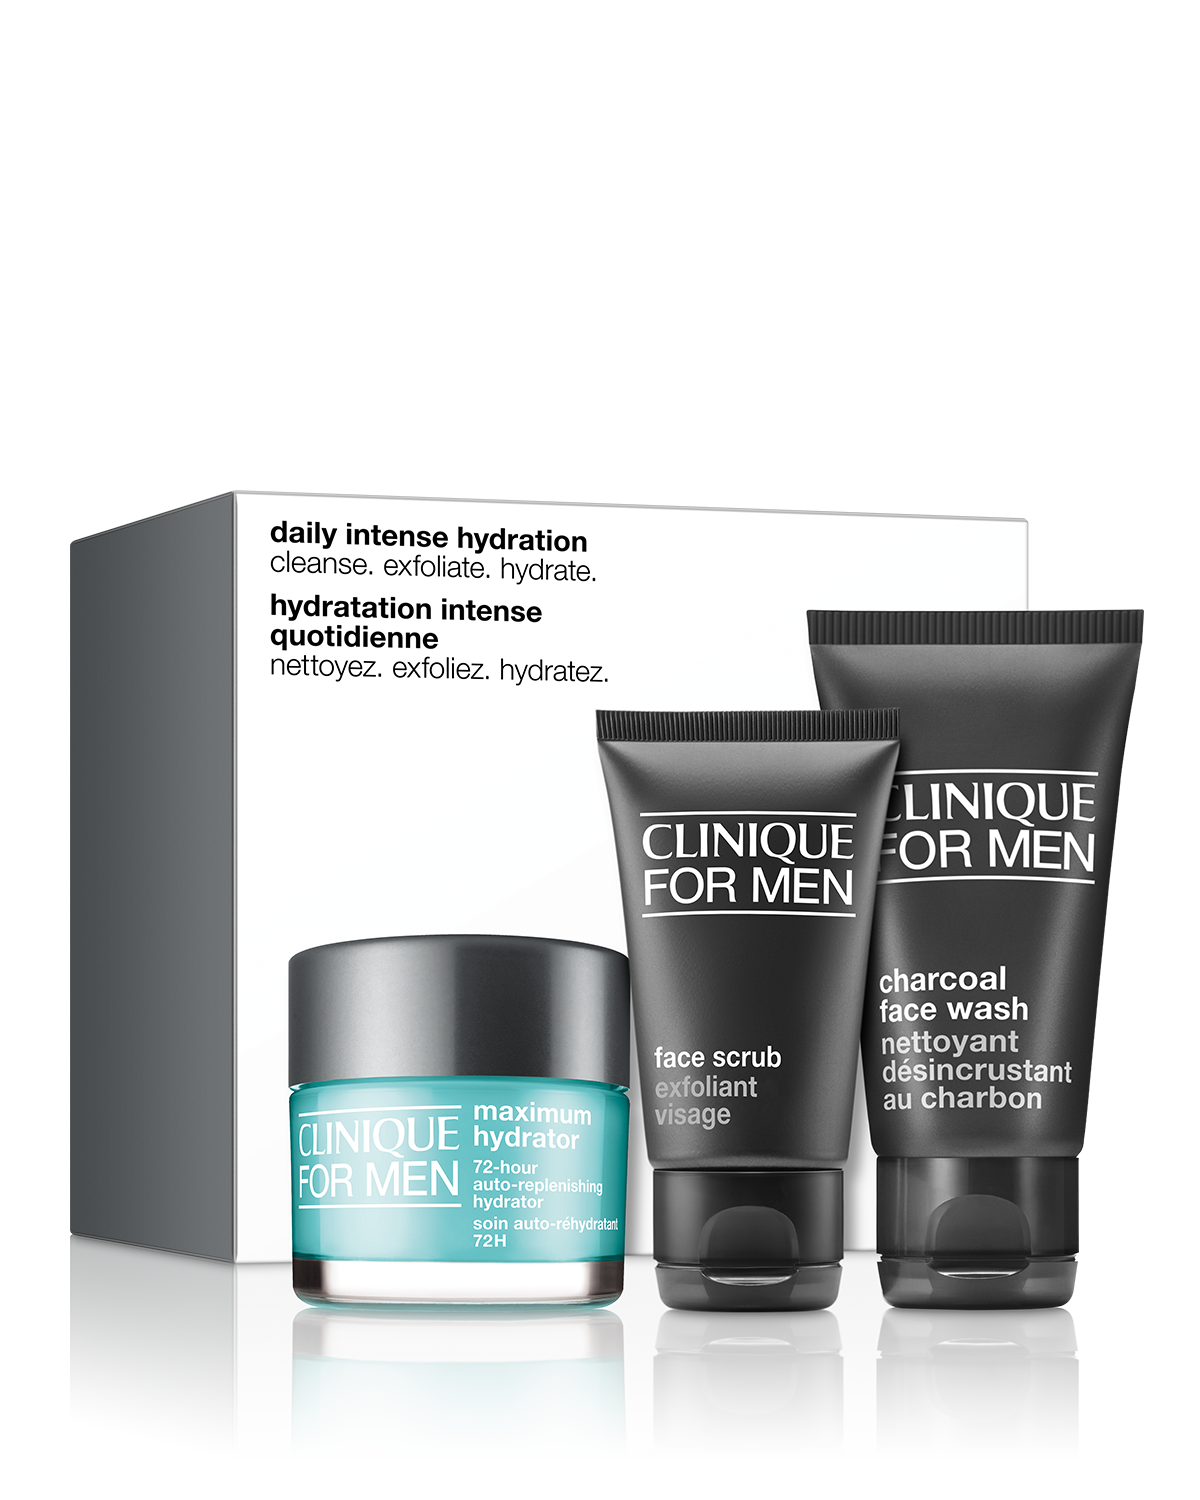 Daily Intense Hydration: Clinique For Men Set